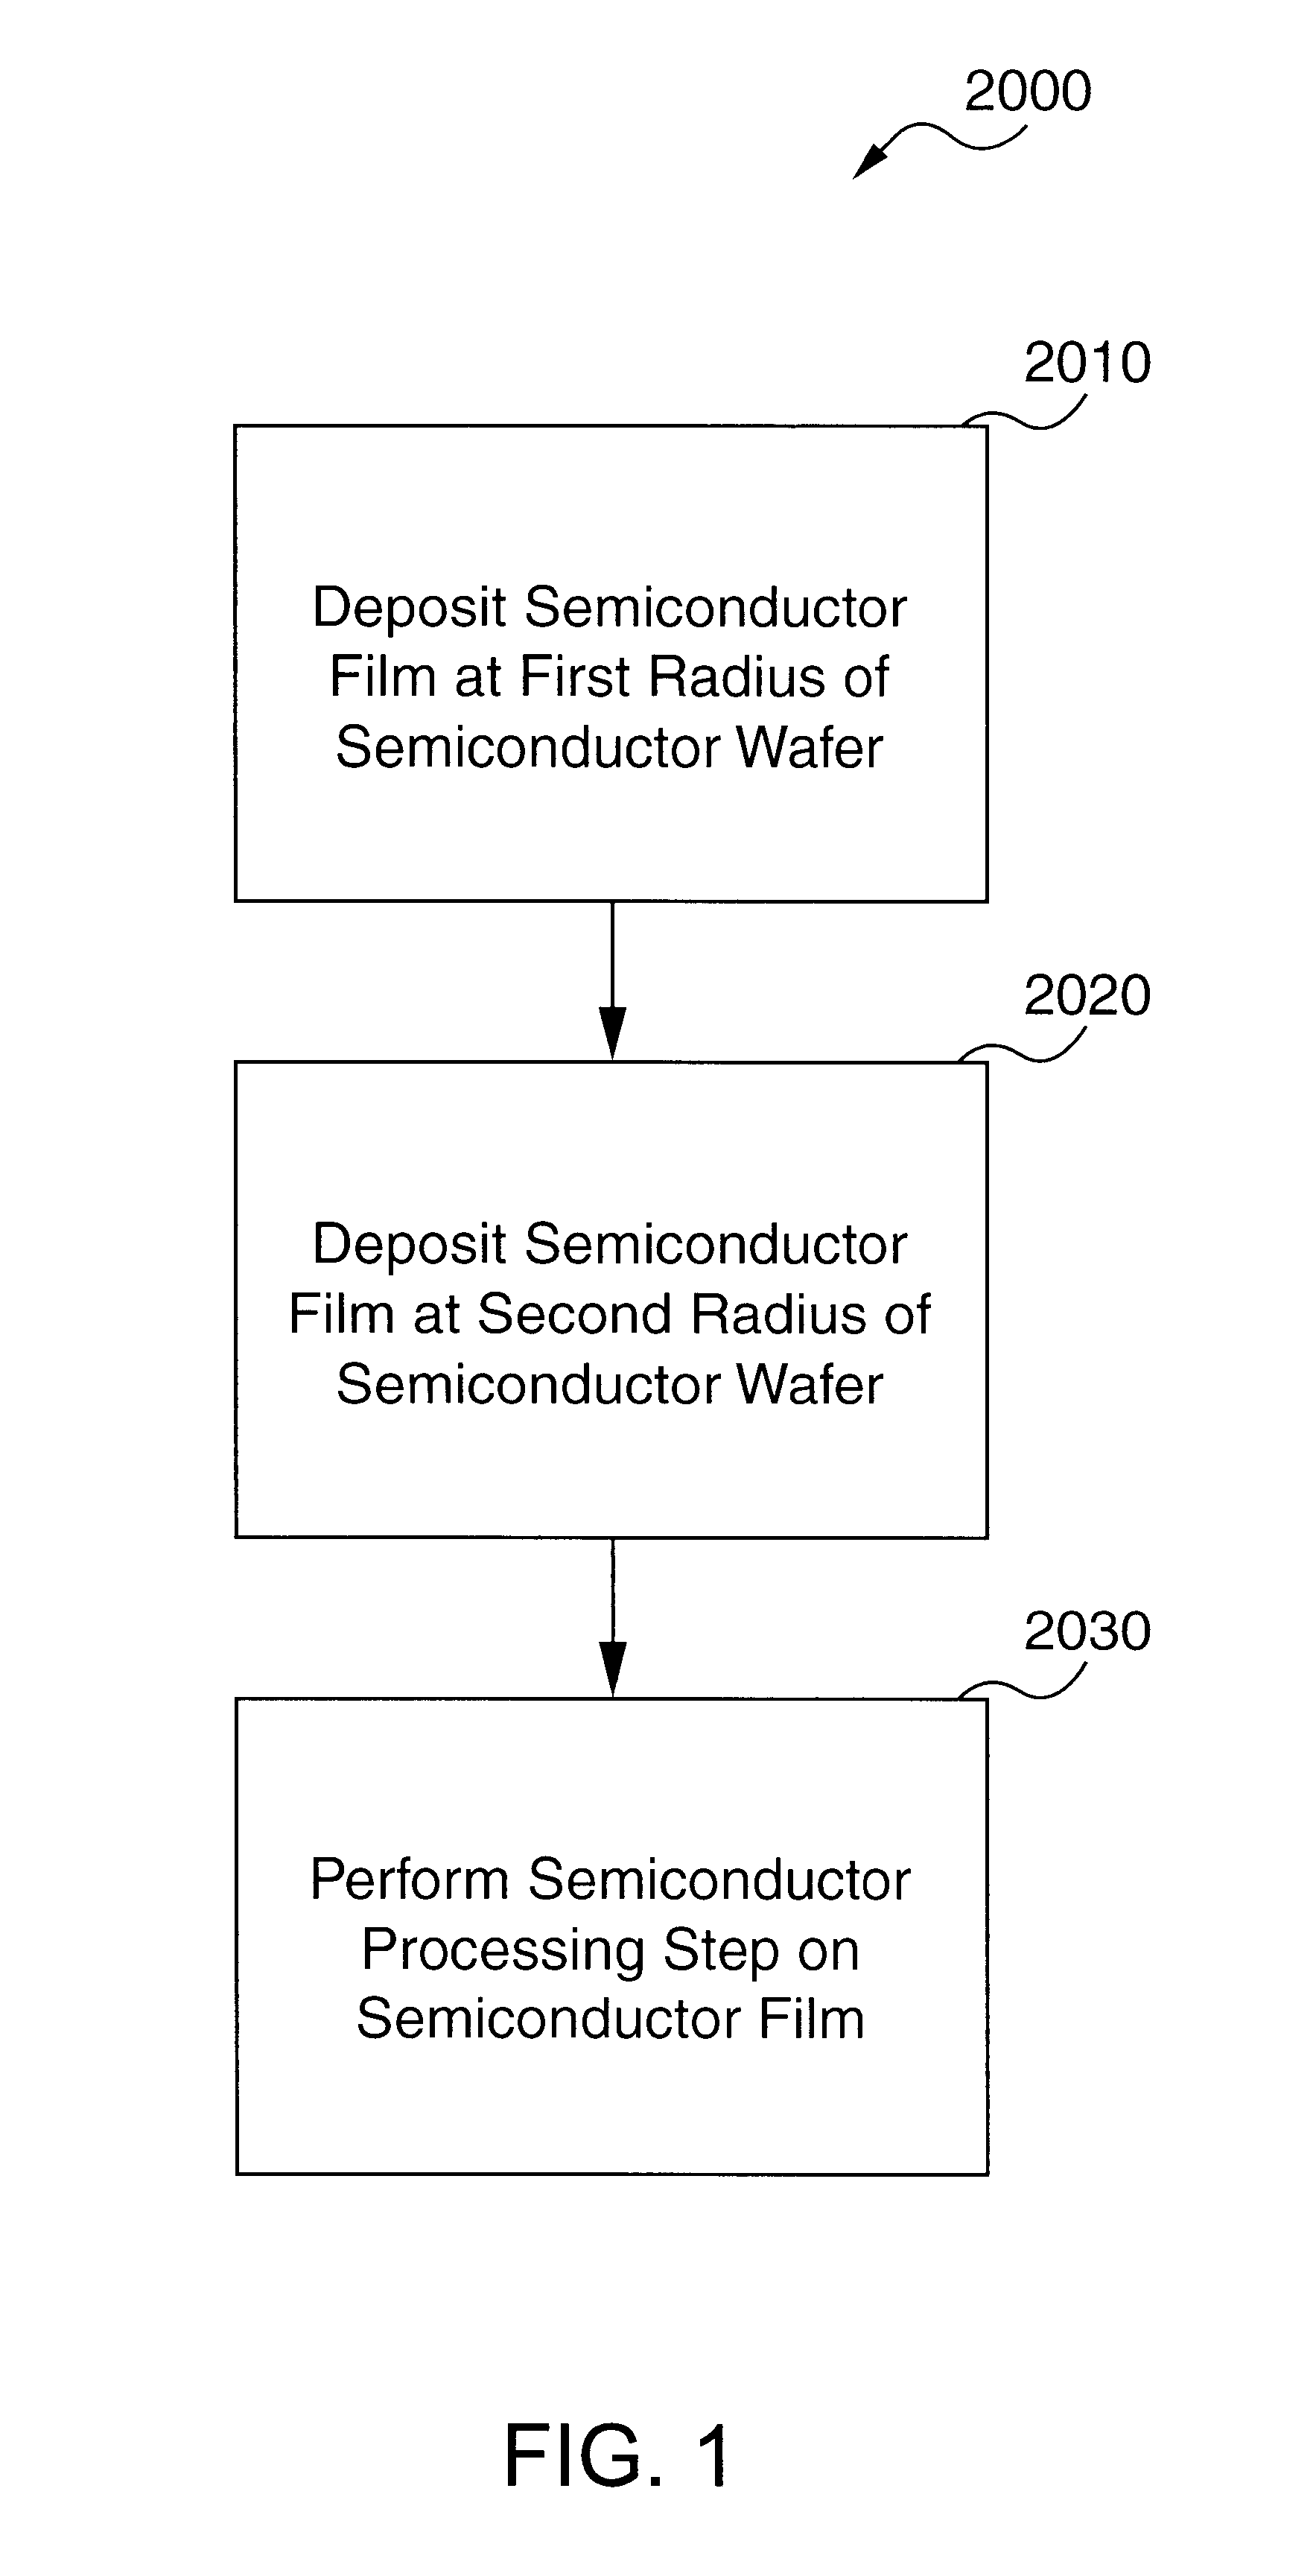 Deliberate semiconductor film variation to compensate for radial processing differences, determine optimal device characteristics, or produce small productions